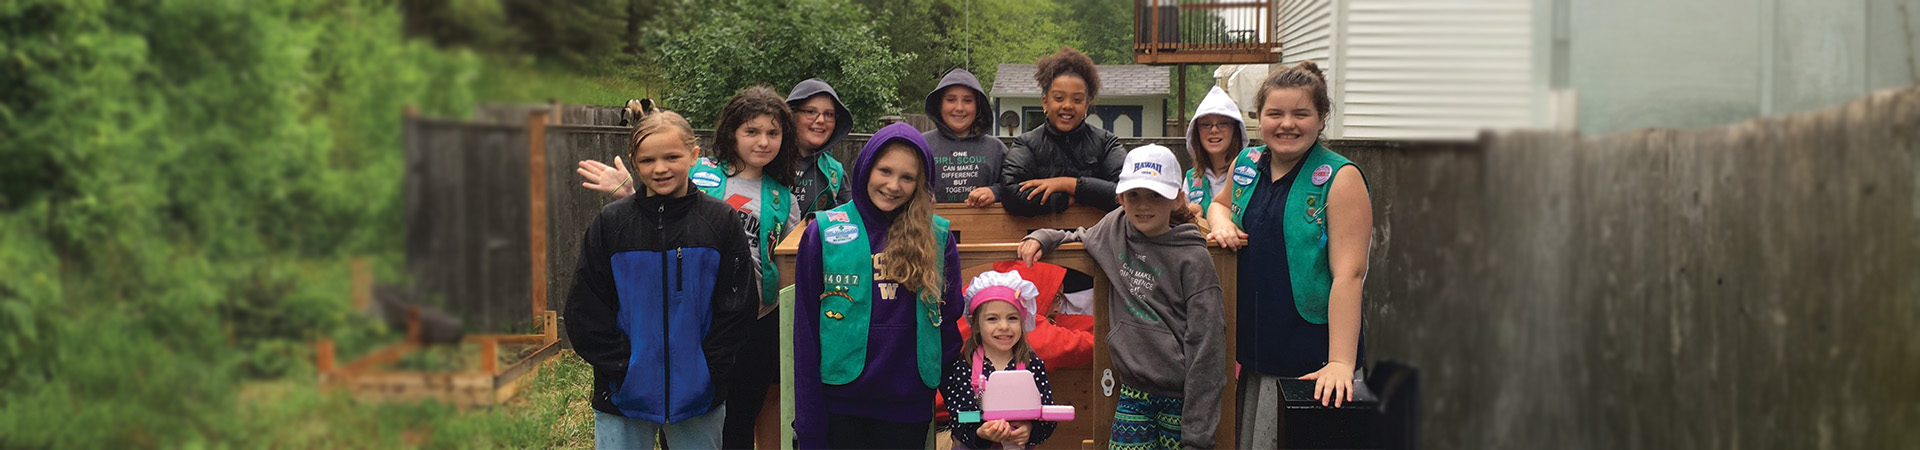  Girl Scout Troop 44017 and Hannah Mae show off their playhouse-in-the-making.  